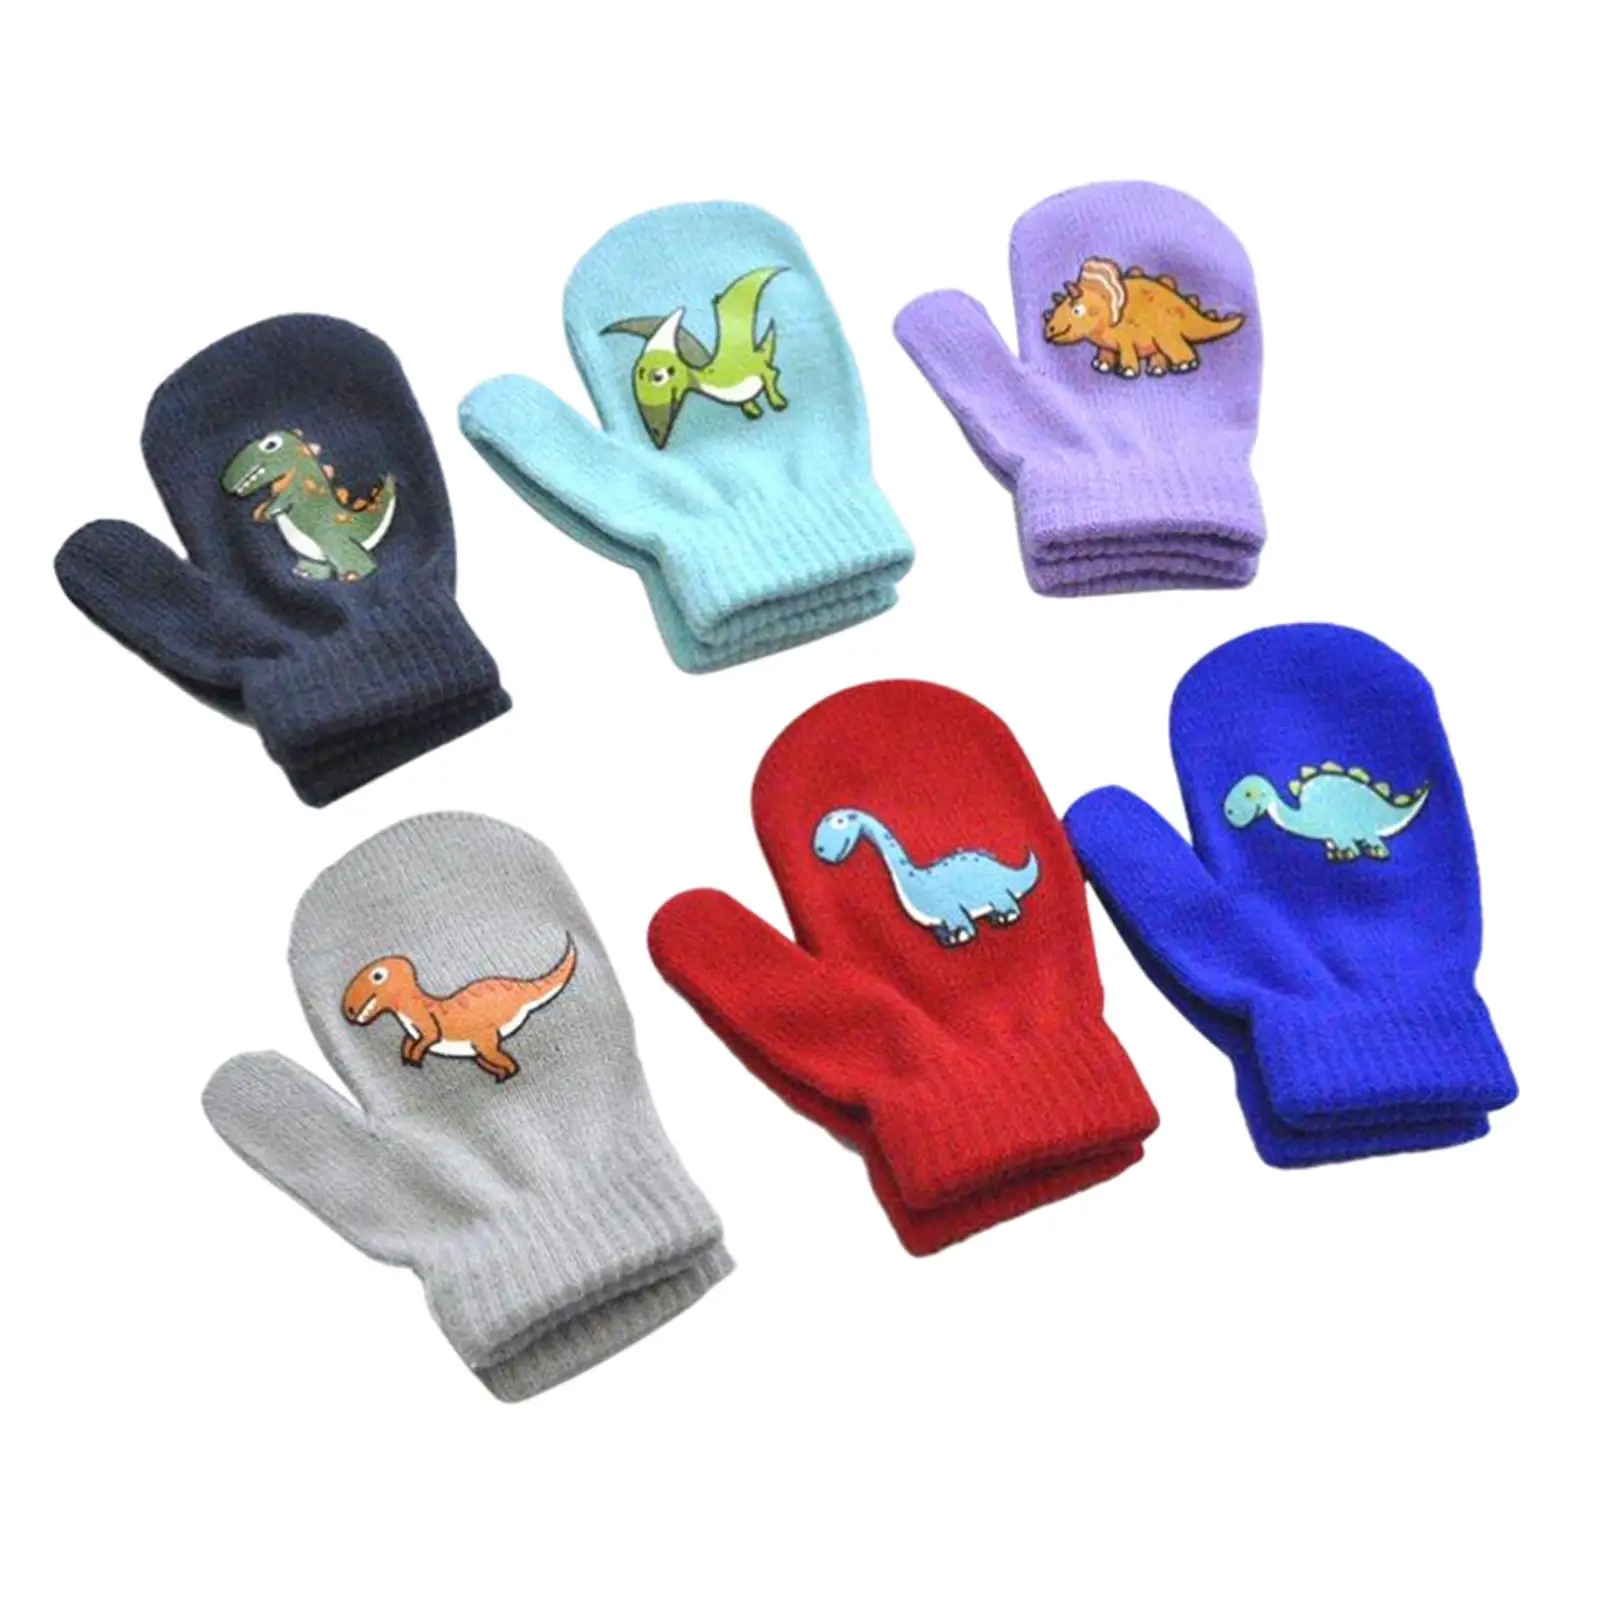 6 Pairs Kids Winter Gloves Stretch Knitted for Boys Girls Reusable Assorted